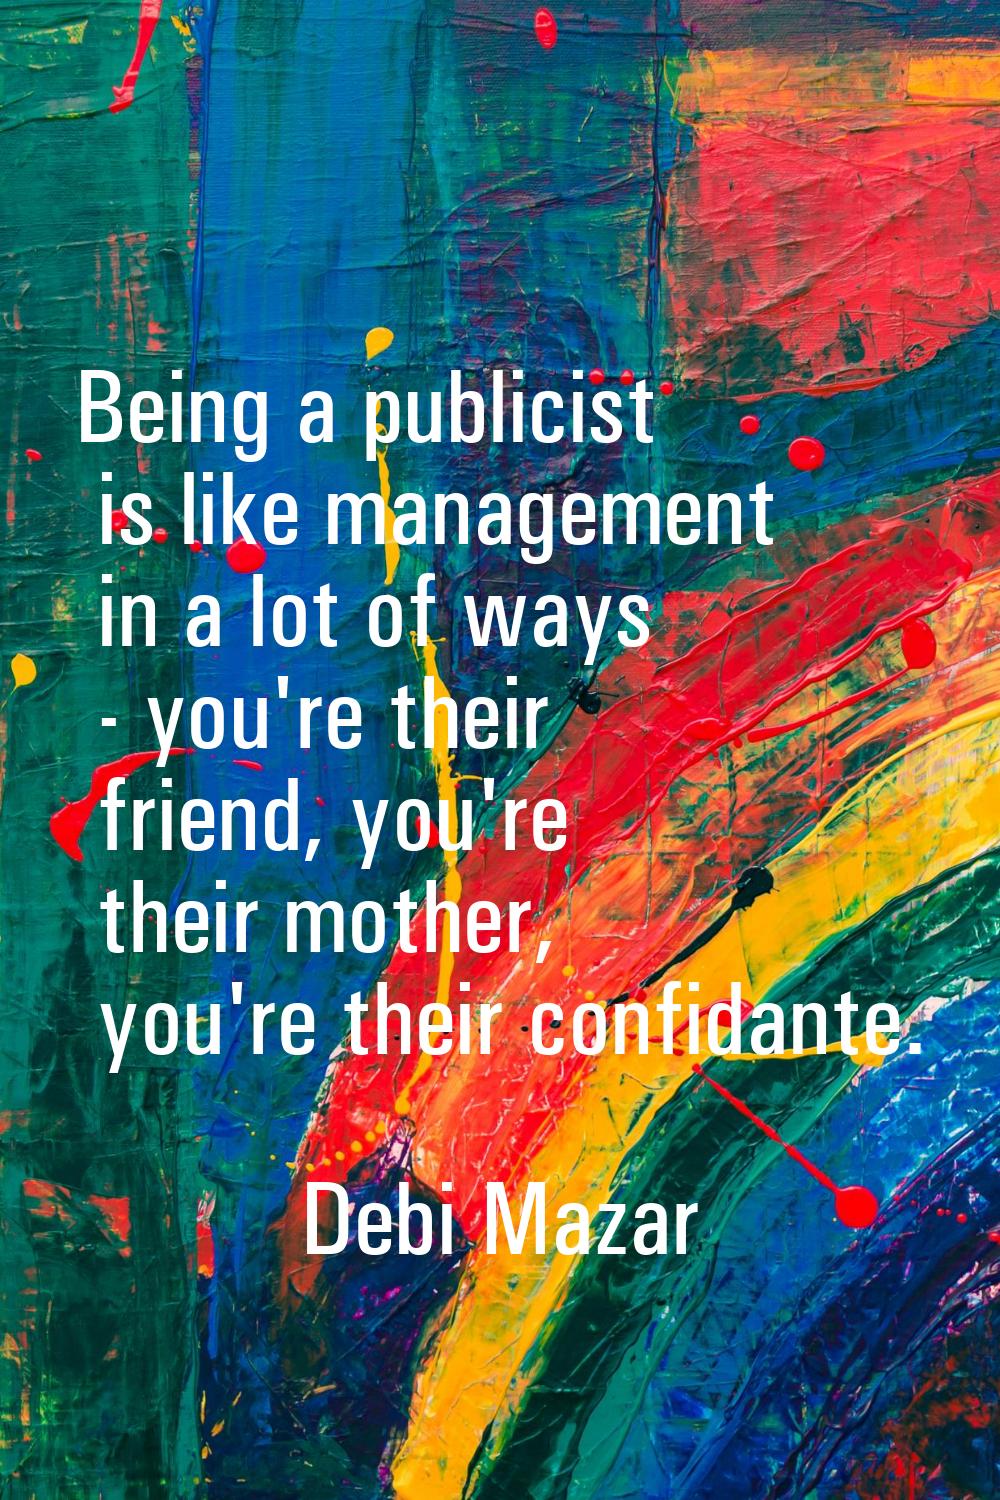 Being a publicist is like management in a lot of ways - you're their friend, you're their mother, y